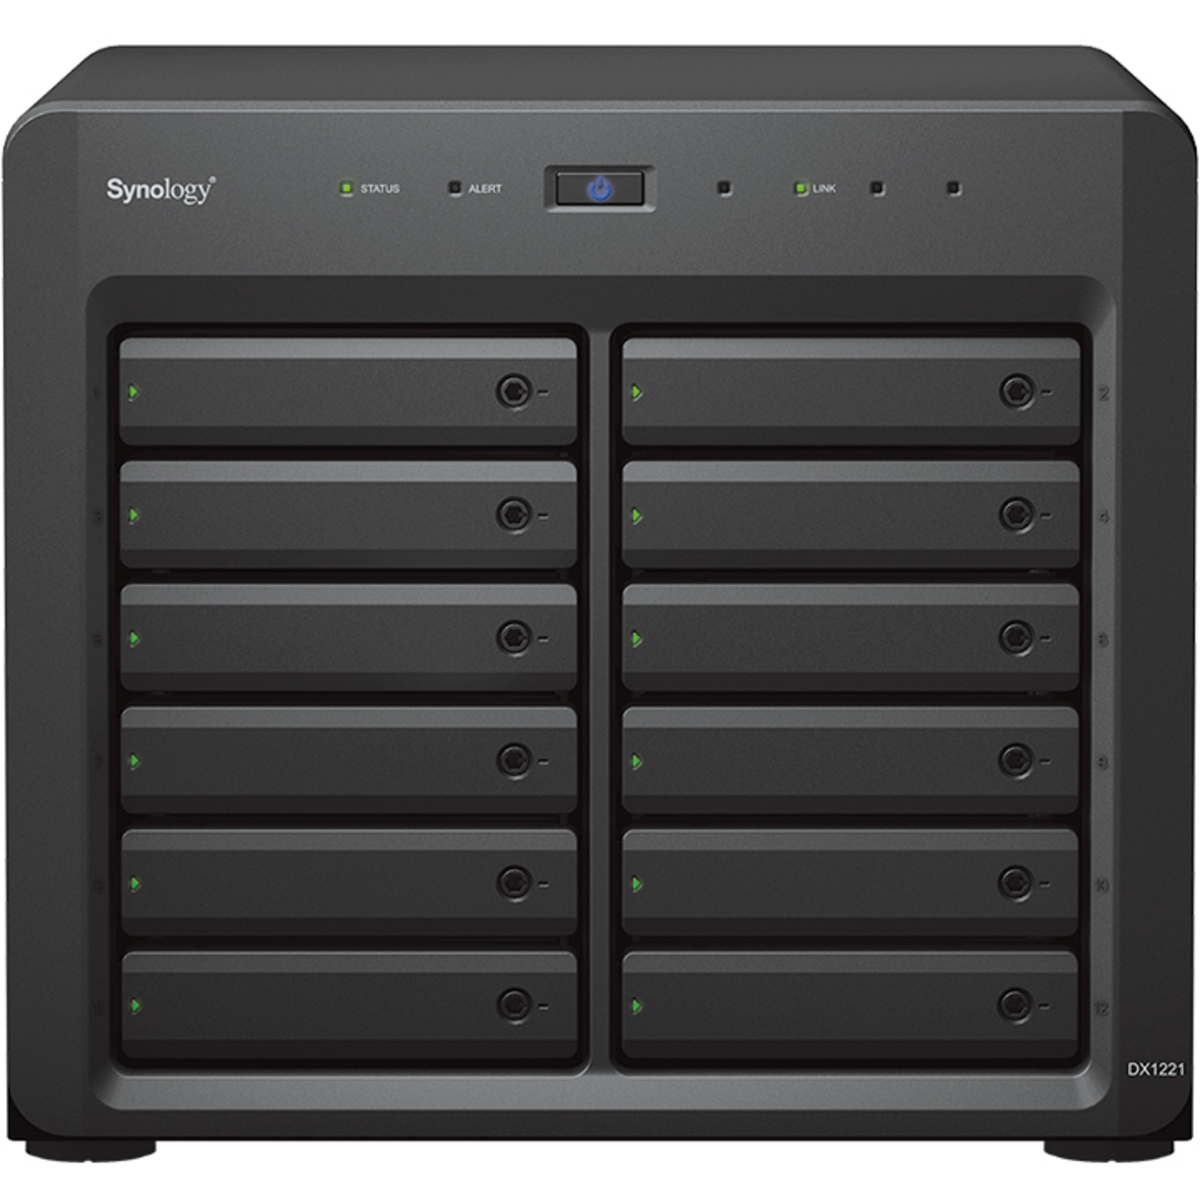 Synology DX1222 External Expansion Drive 162tb 12-Bay Desktop Multimedia / Power User / Business Expansion Enclosure 9x18tb Synology HAT5310 Series HAT5310-18T 3.5 7200rpm SATA 6Gb/s HDD ENTERPRISE Class Drives Installed - Burn-In Tested DX1222 External Expansion Drive